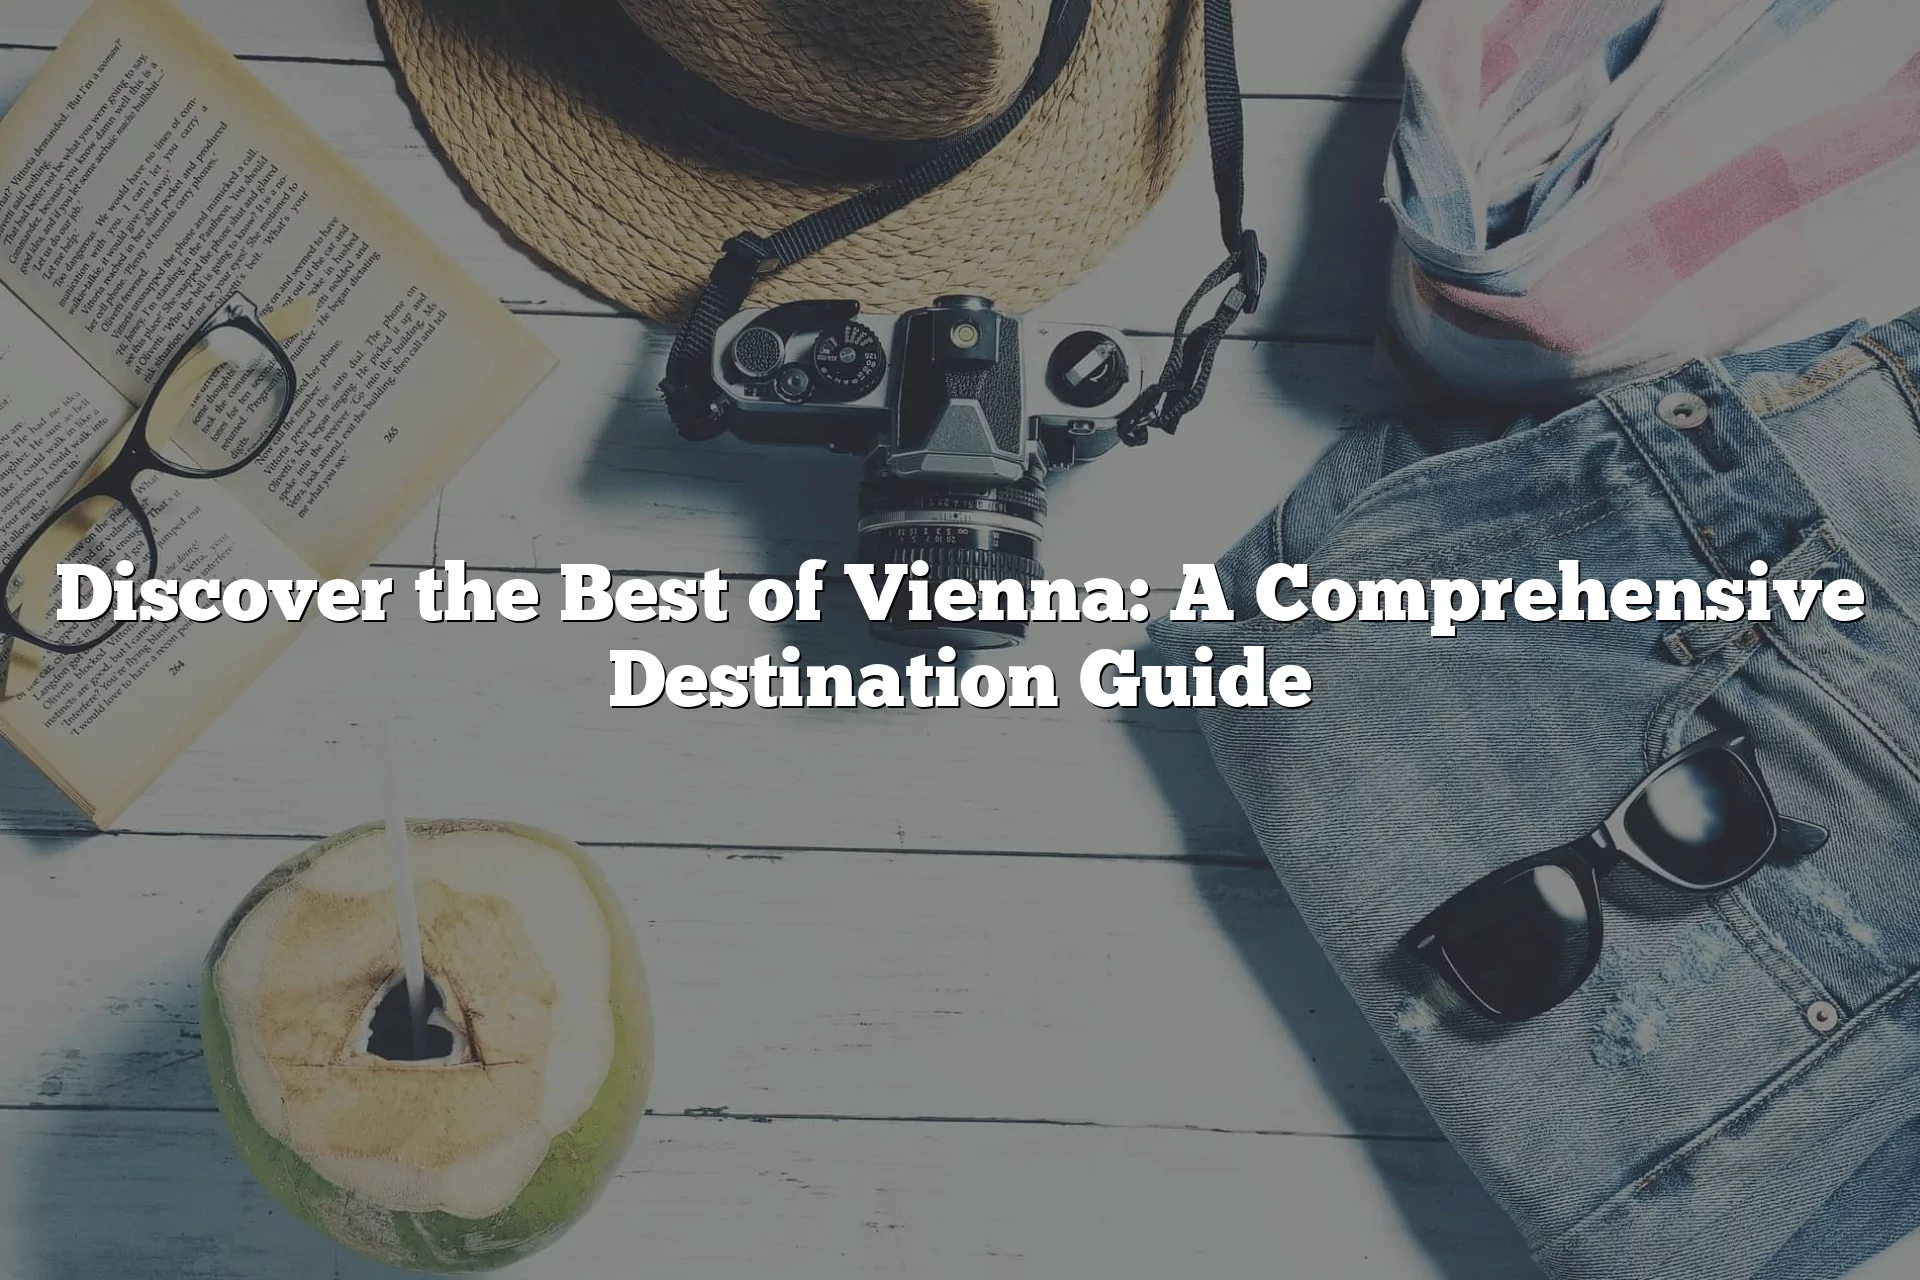 Discover the Best of Vienna: A Comprehensive Destination Guide